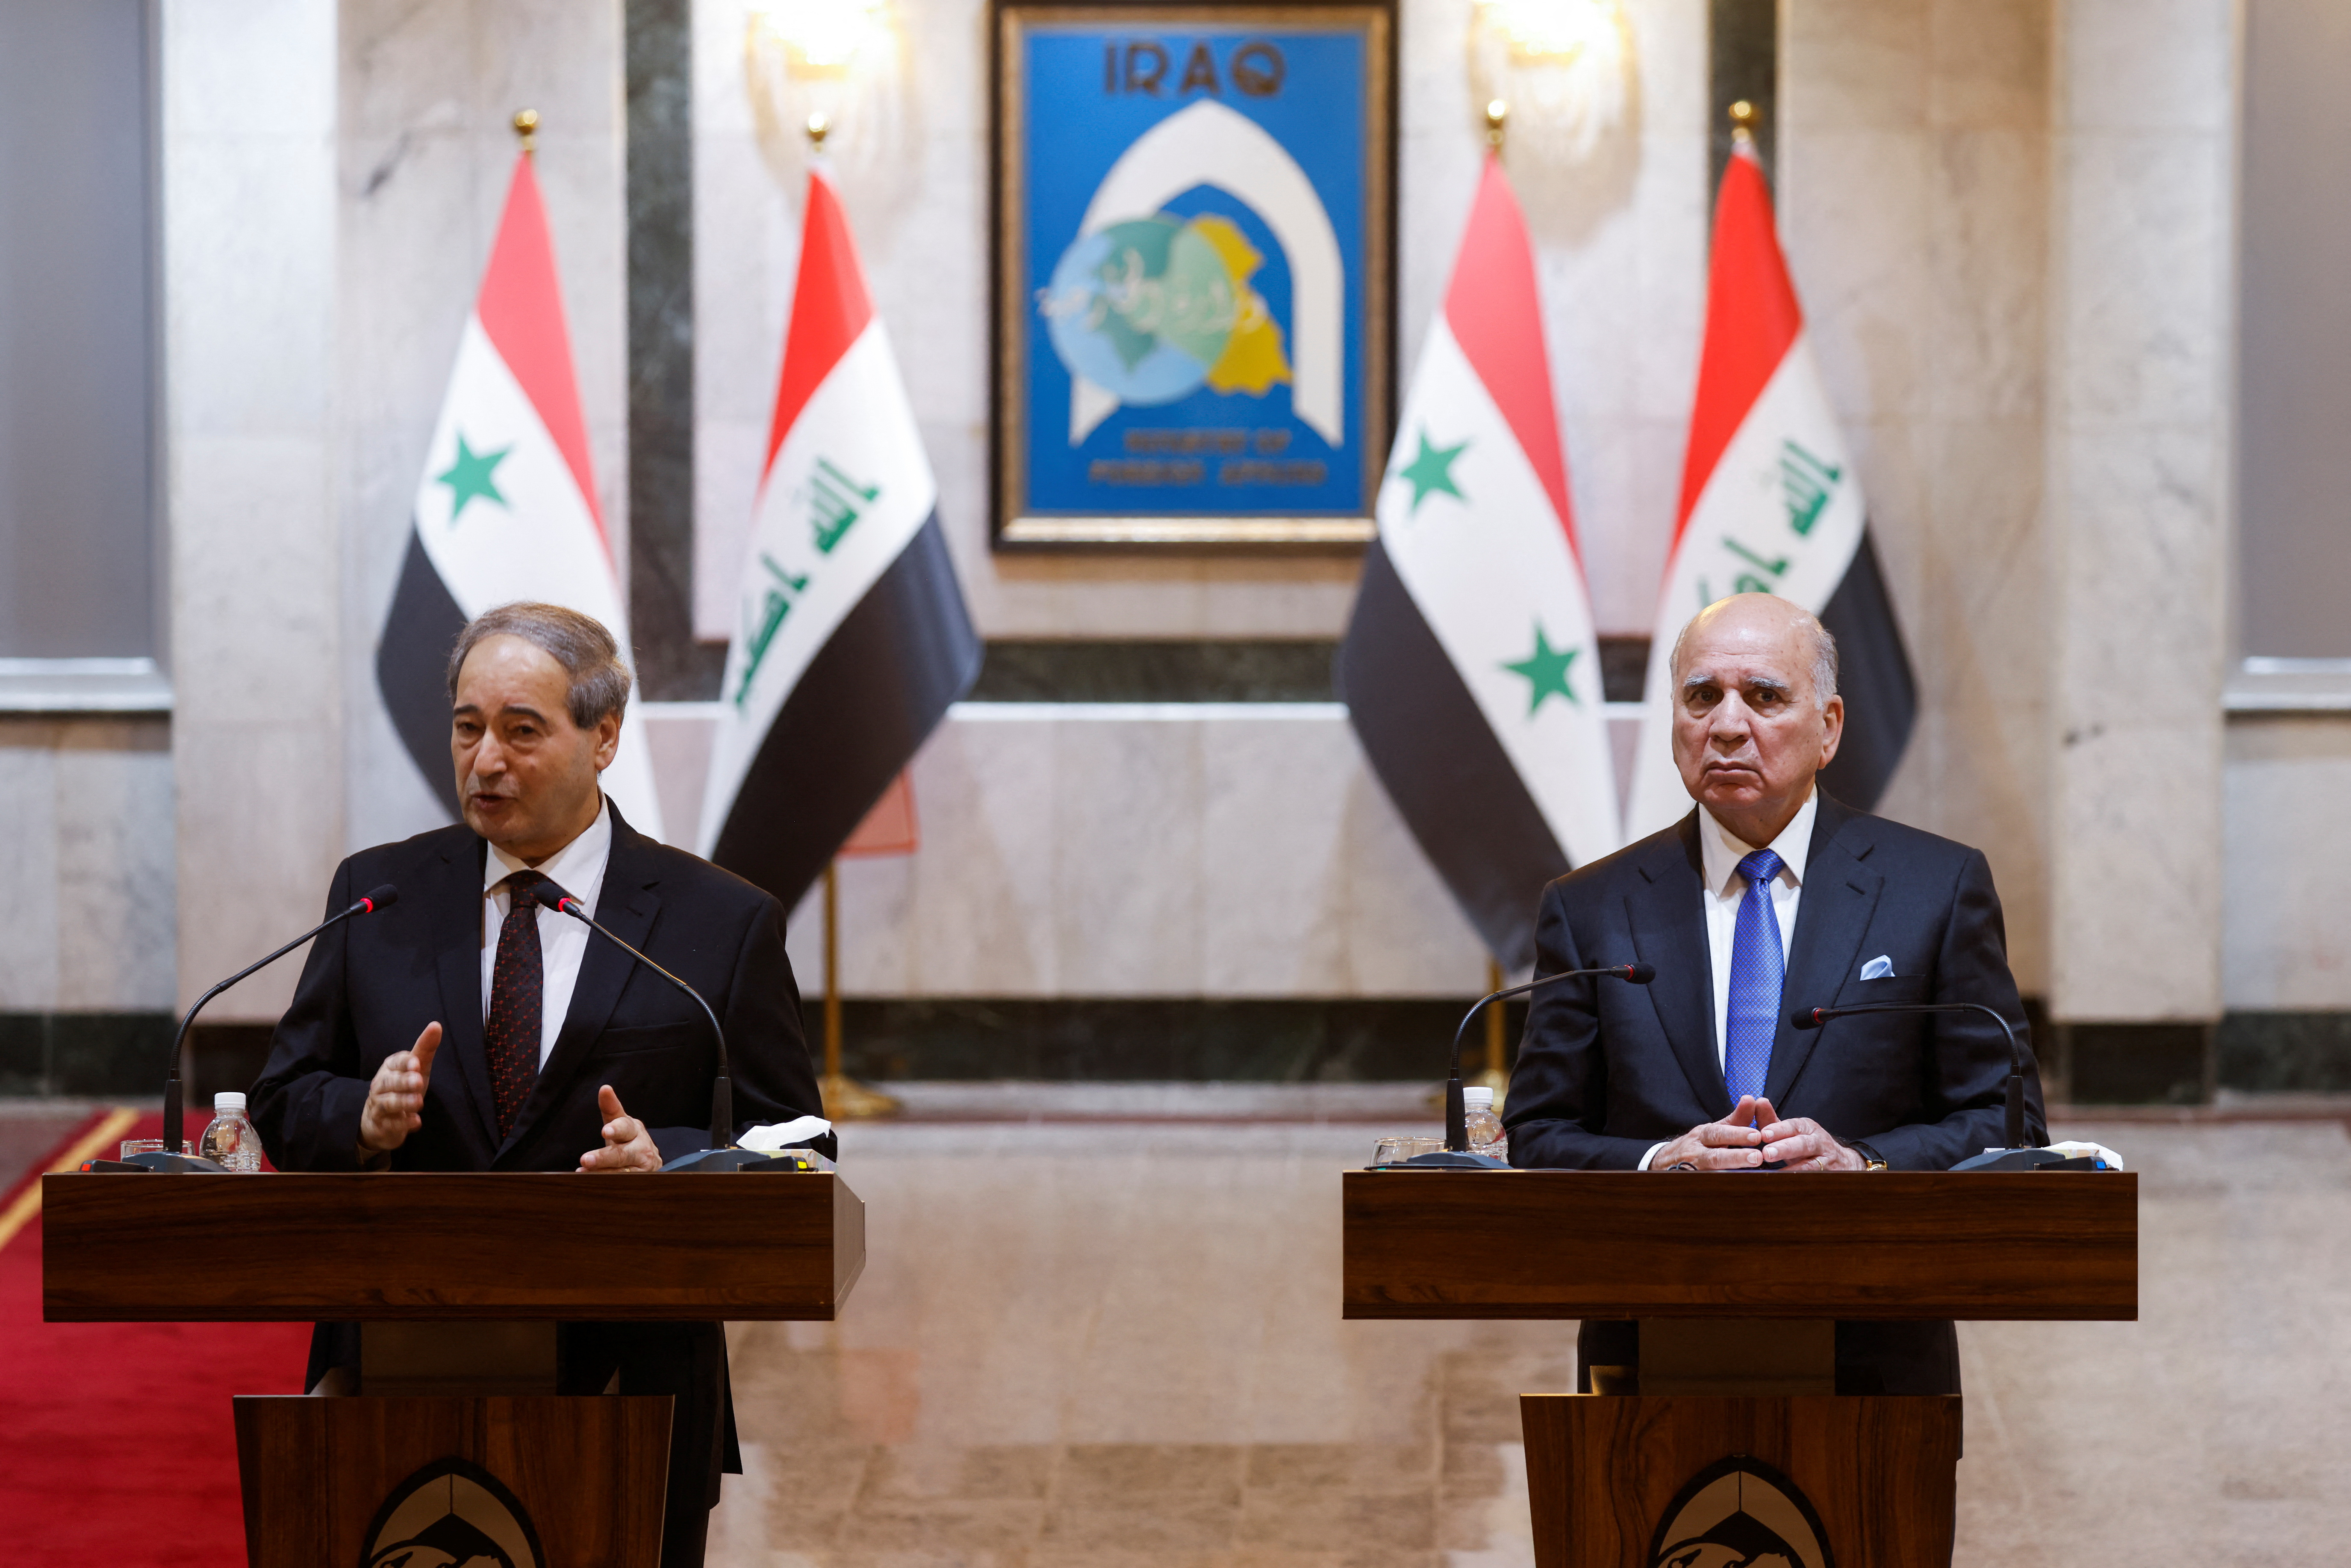 Syrian Foreign Minister Faisal Mekdad holds press conference with Iraqi counterpart, in Baghdad